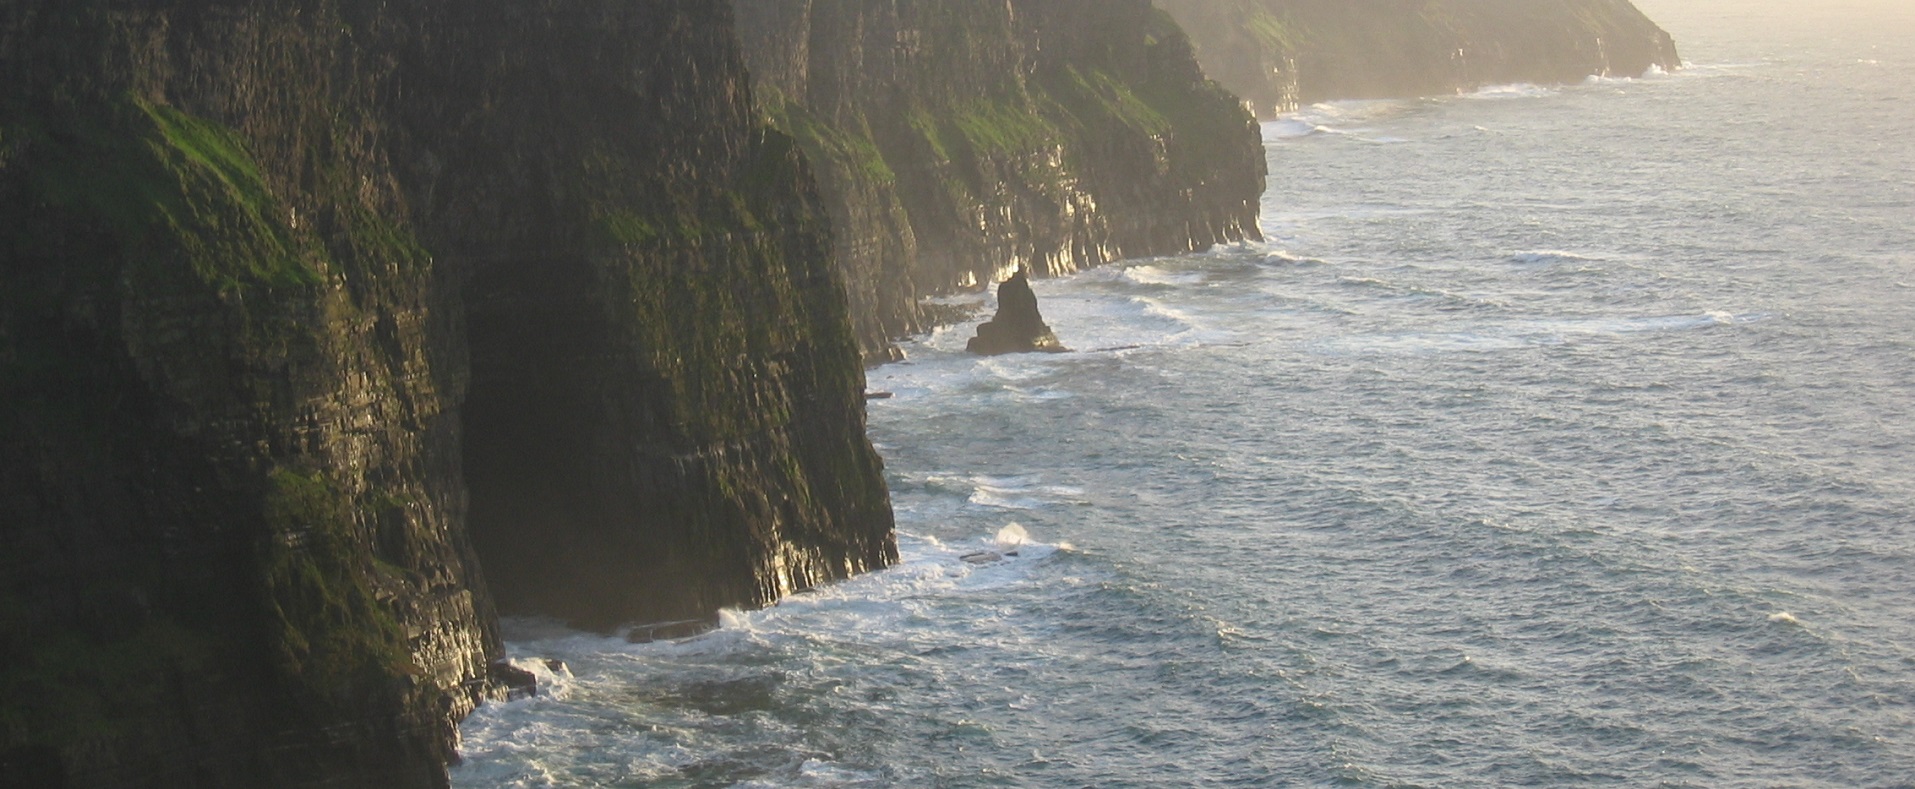 Naming Ceremony - Cliffs of Moher